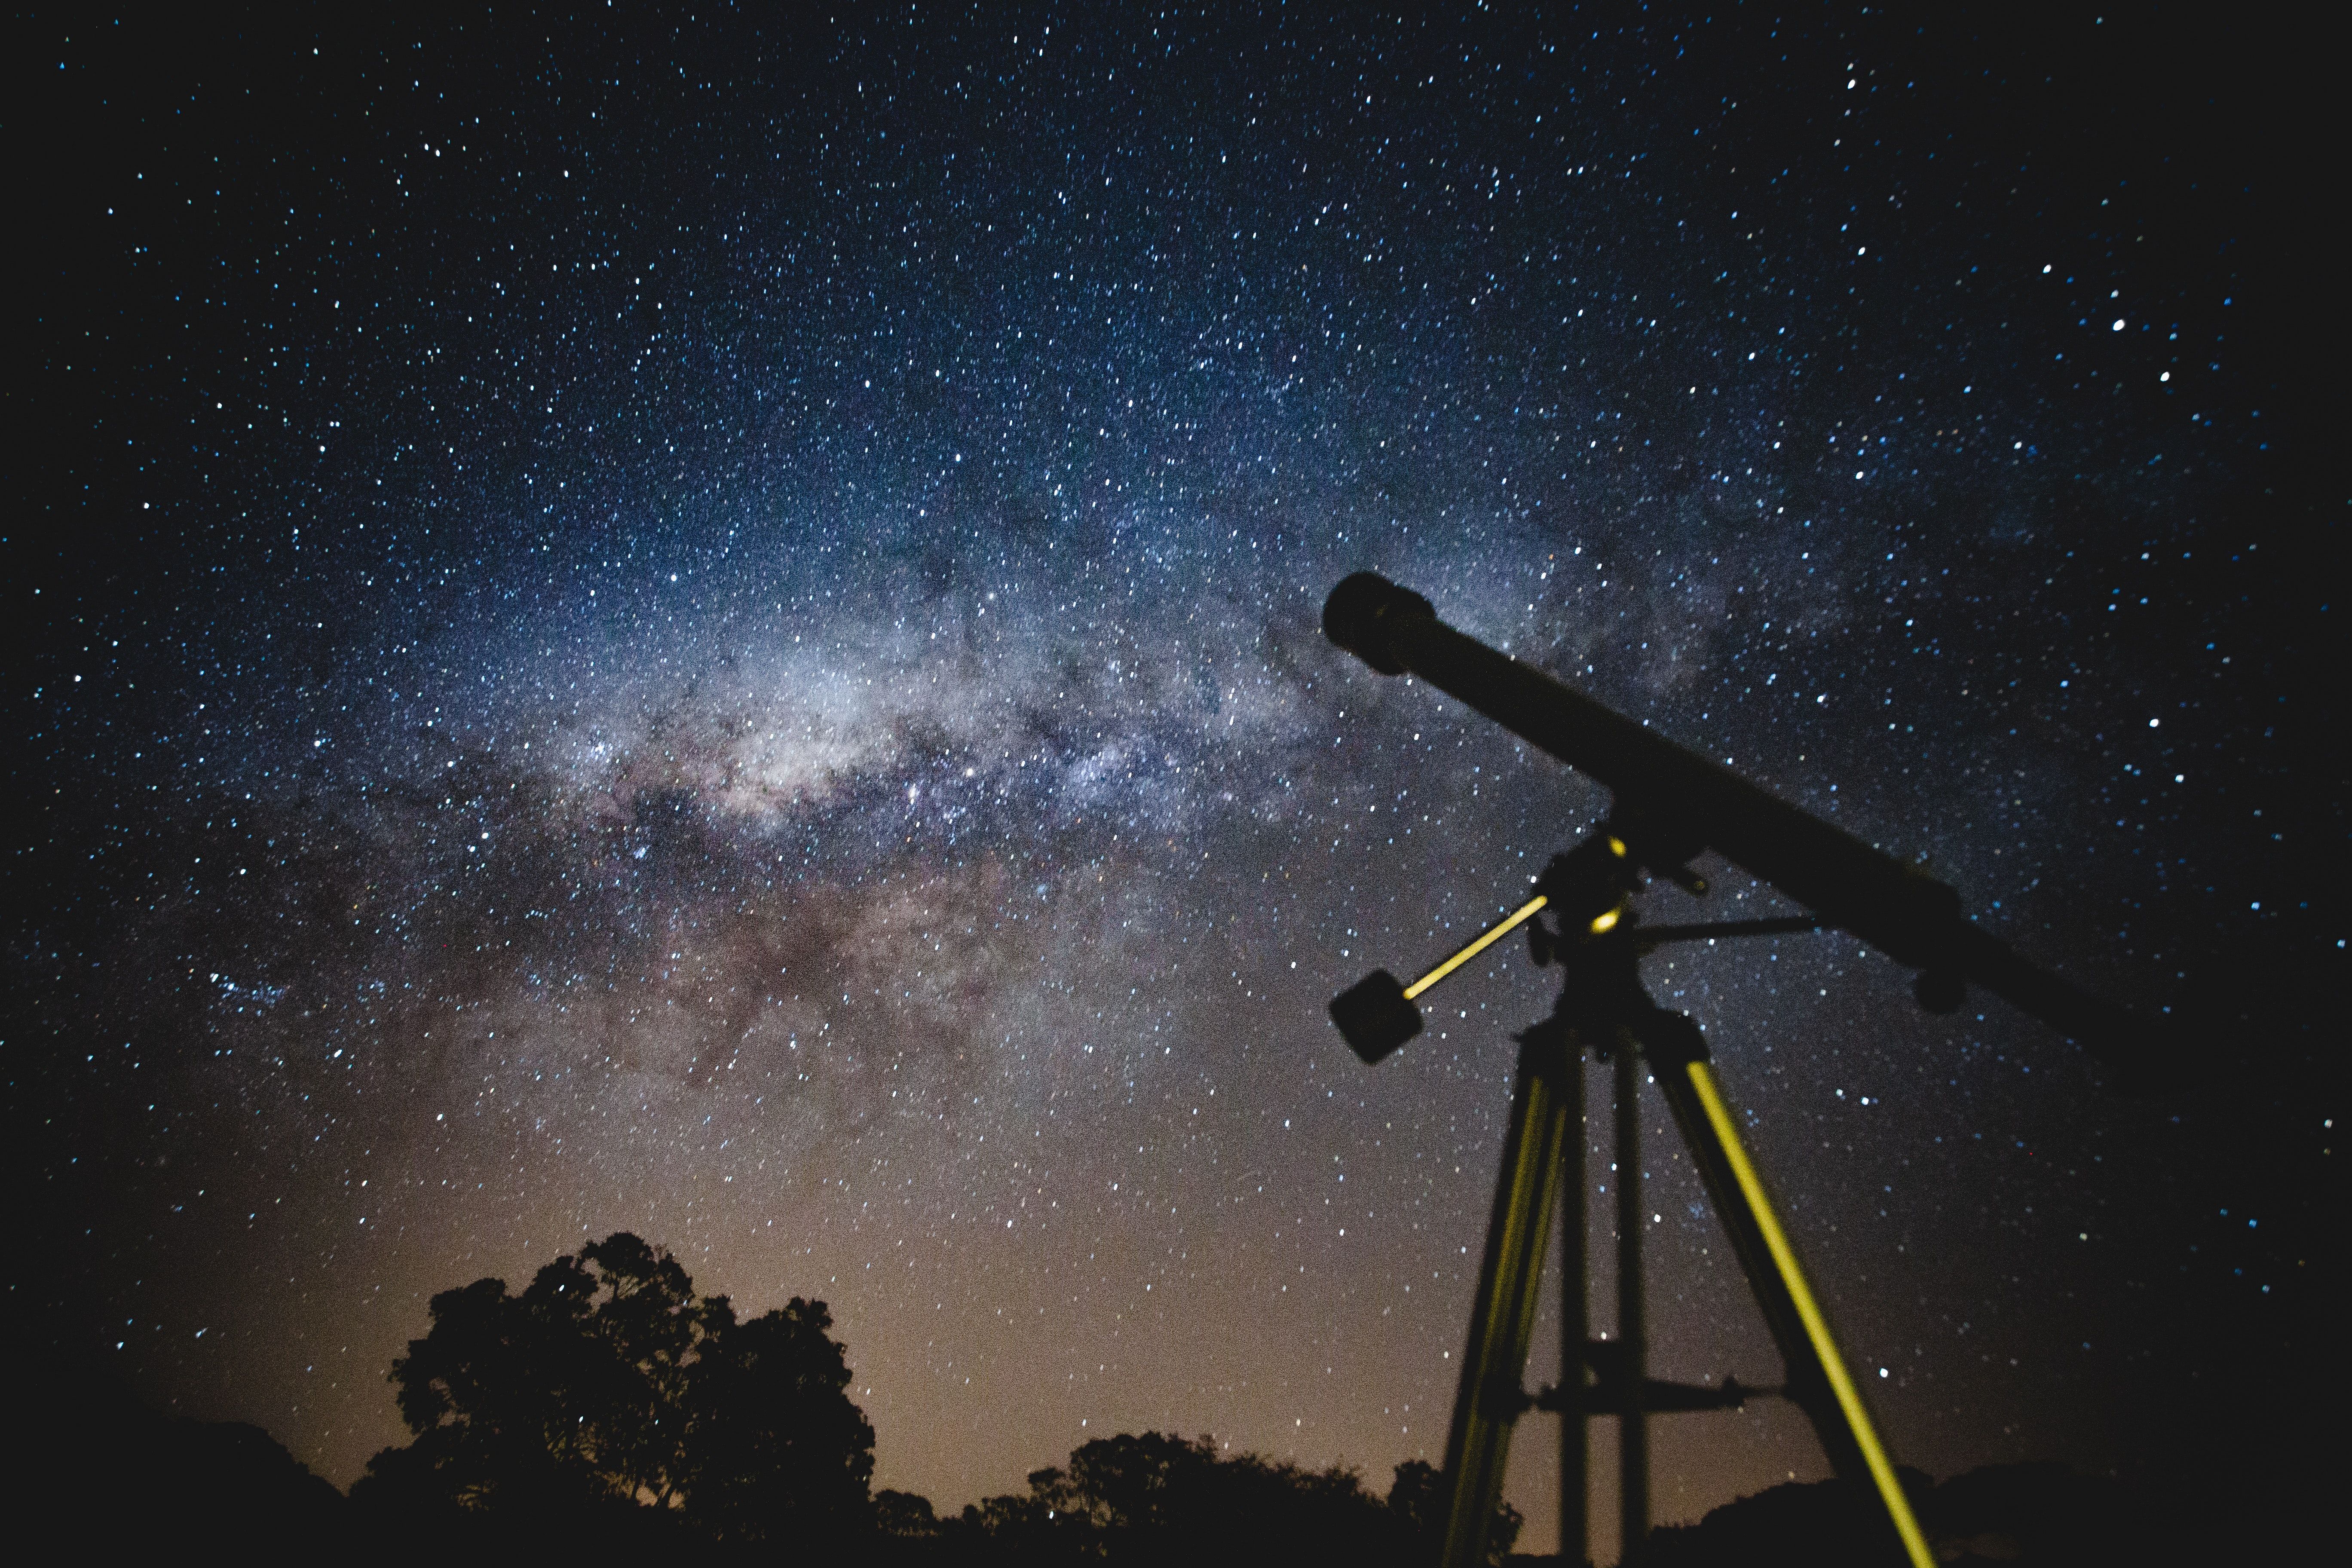 A telescope points at the starry night sky and the Milky Way.